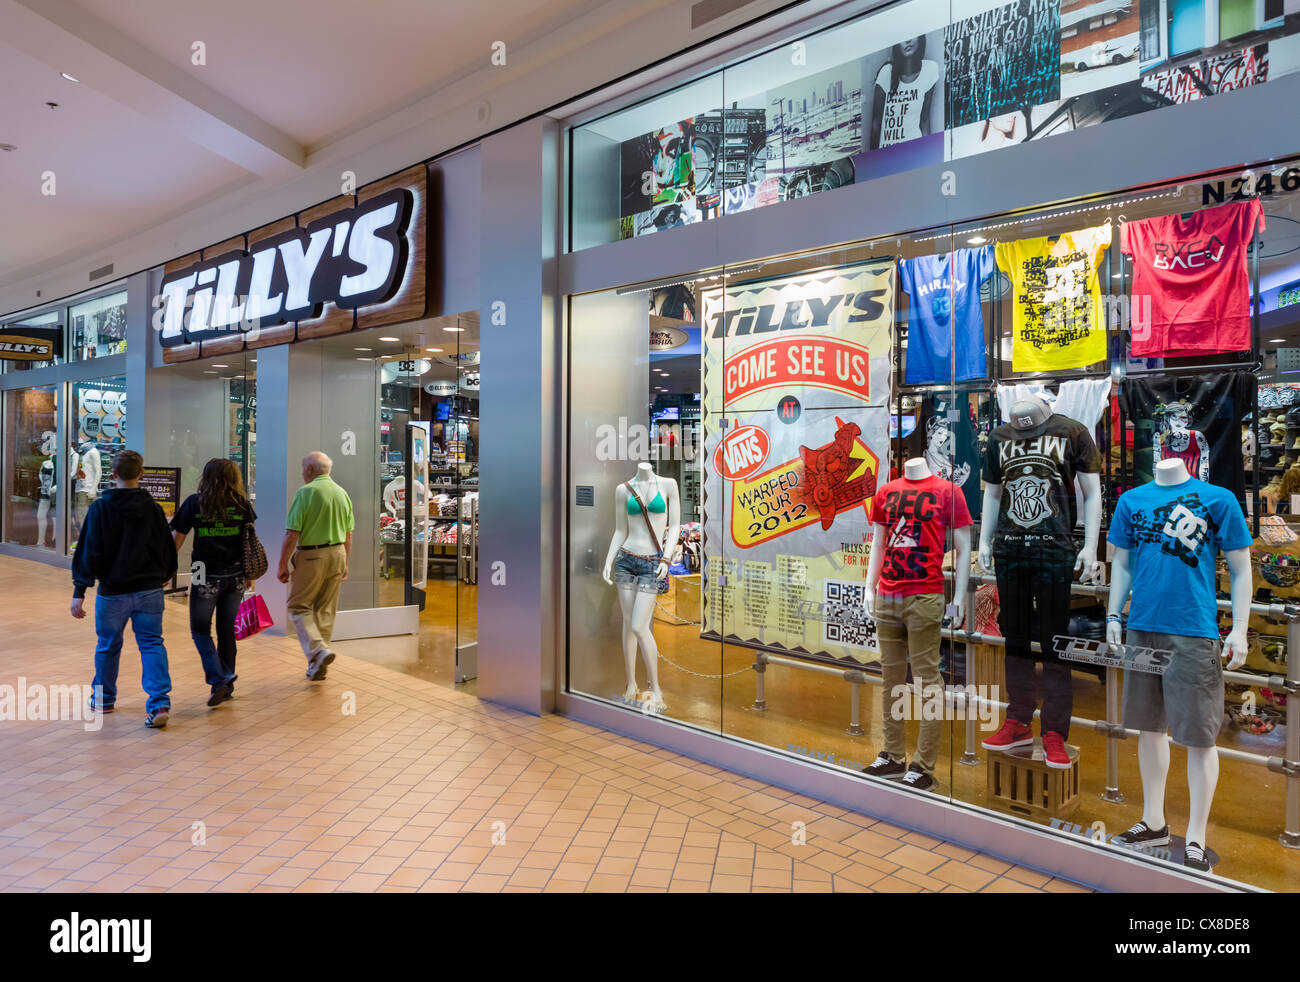 Tilly's store in the Mall of America, Bloomington, Minneapolis, Minnesota, USA Stock Photo